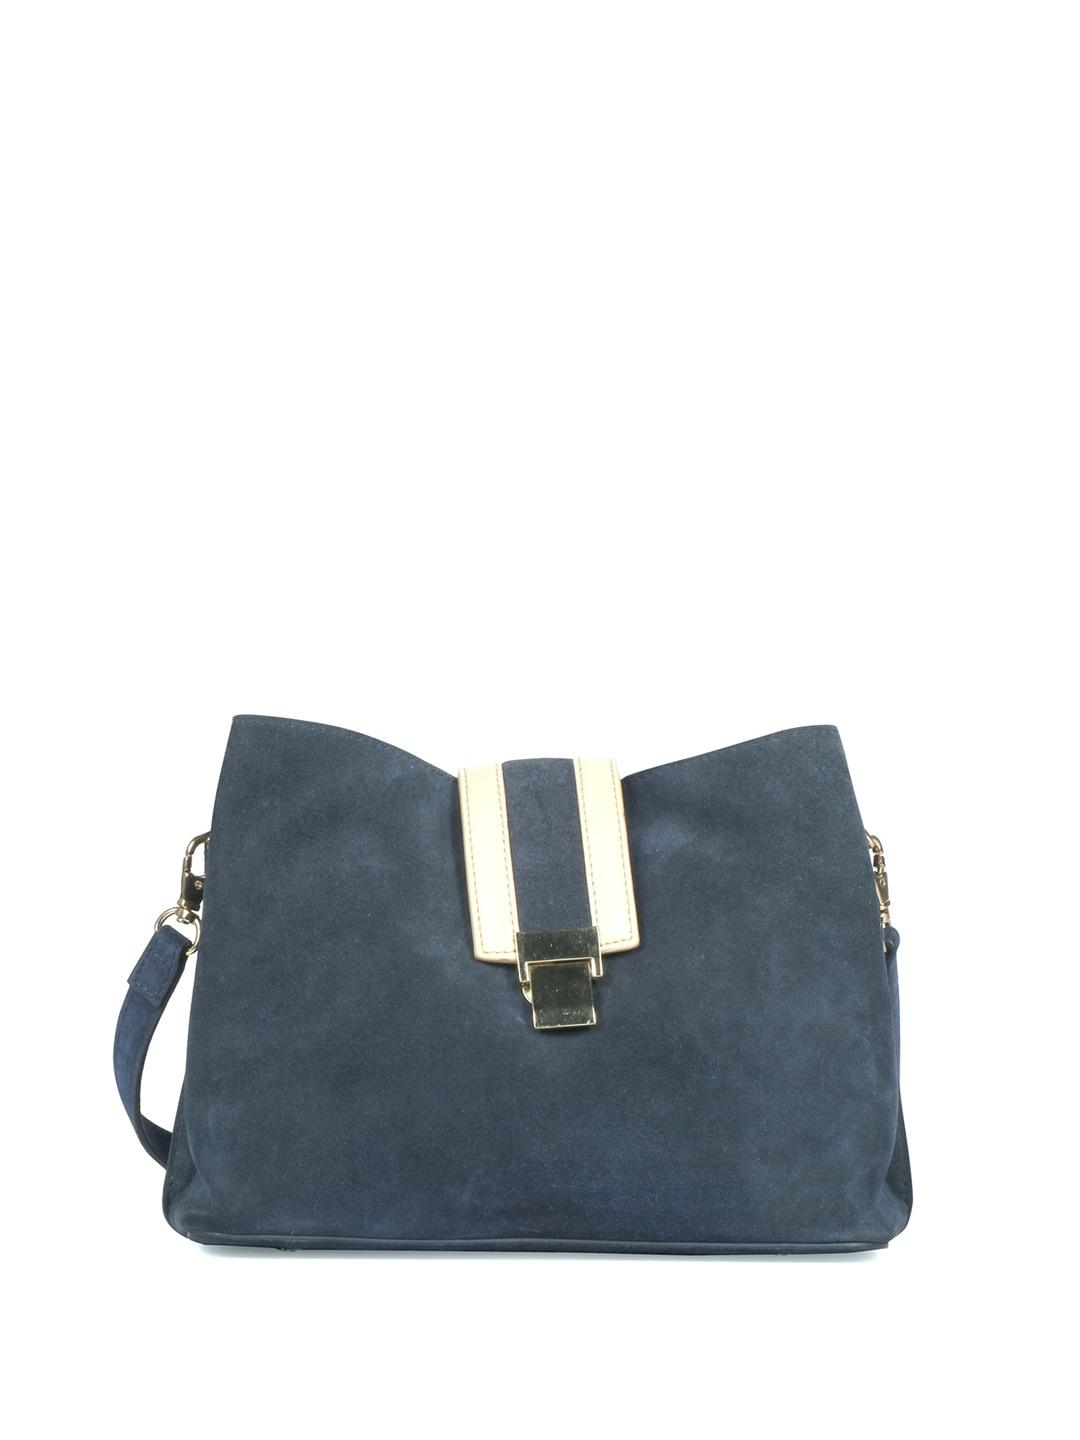 Favore Suede Leather Structured Sling Bag